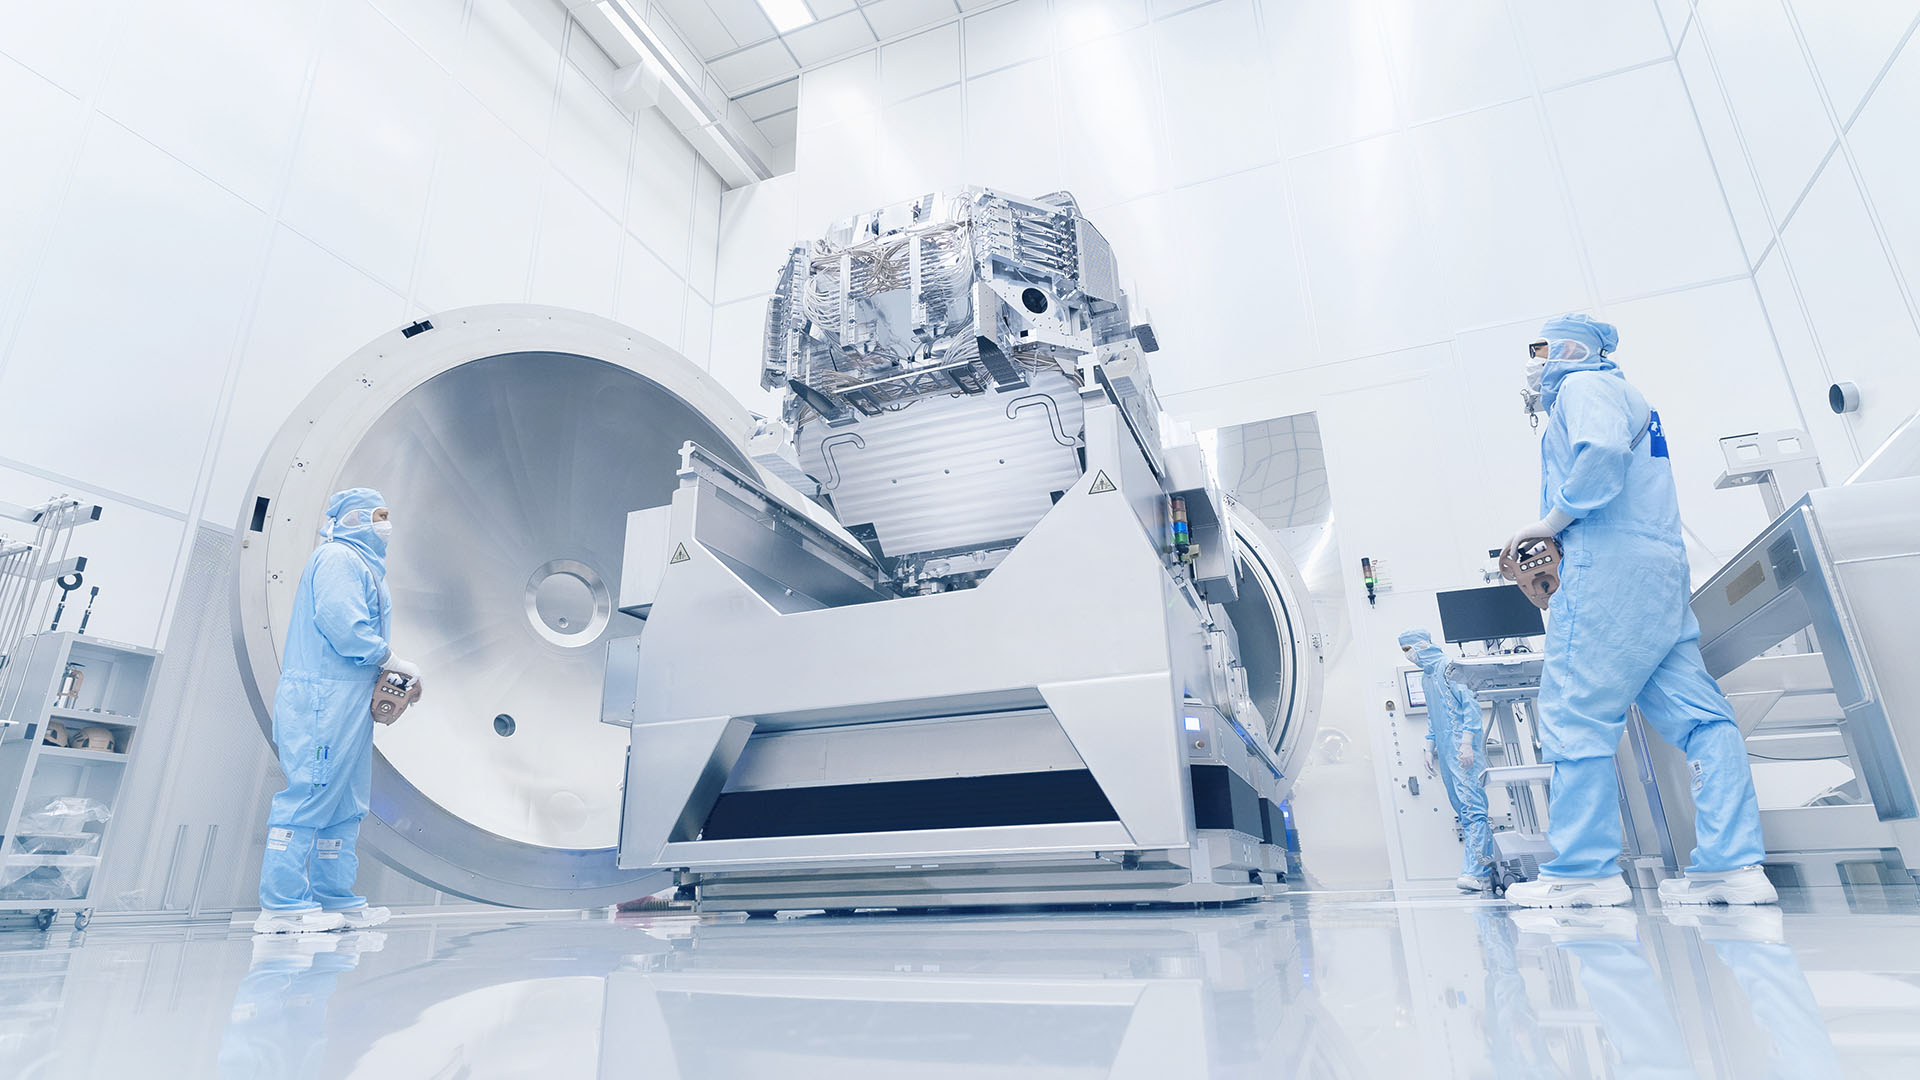 ZEISS Semiconductor Manufacturing Technology